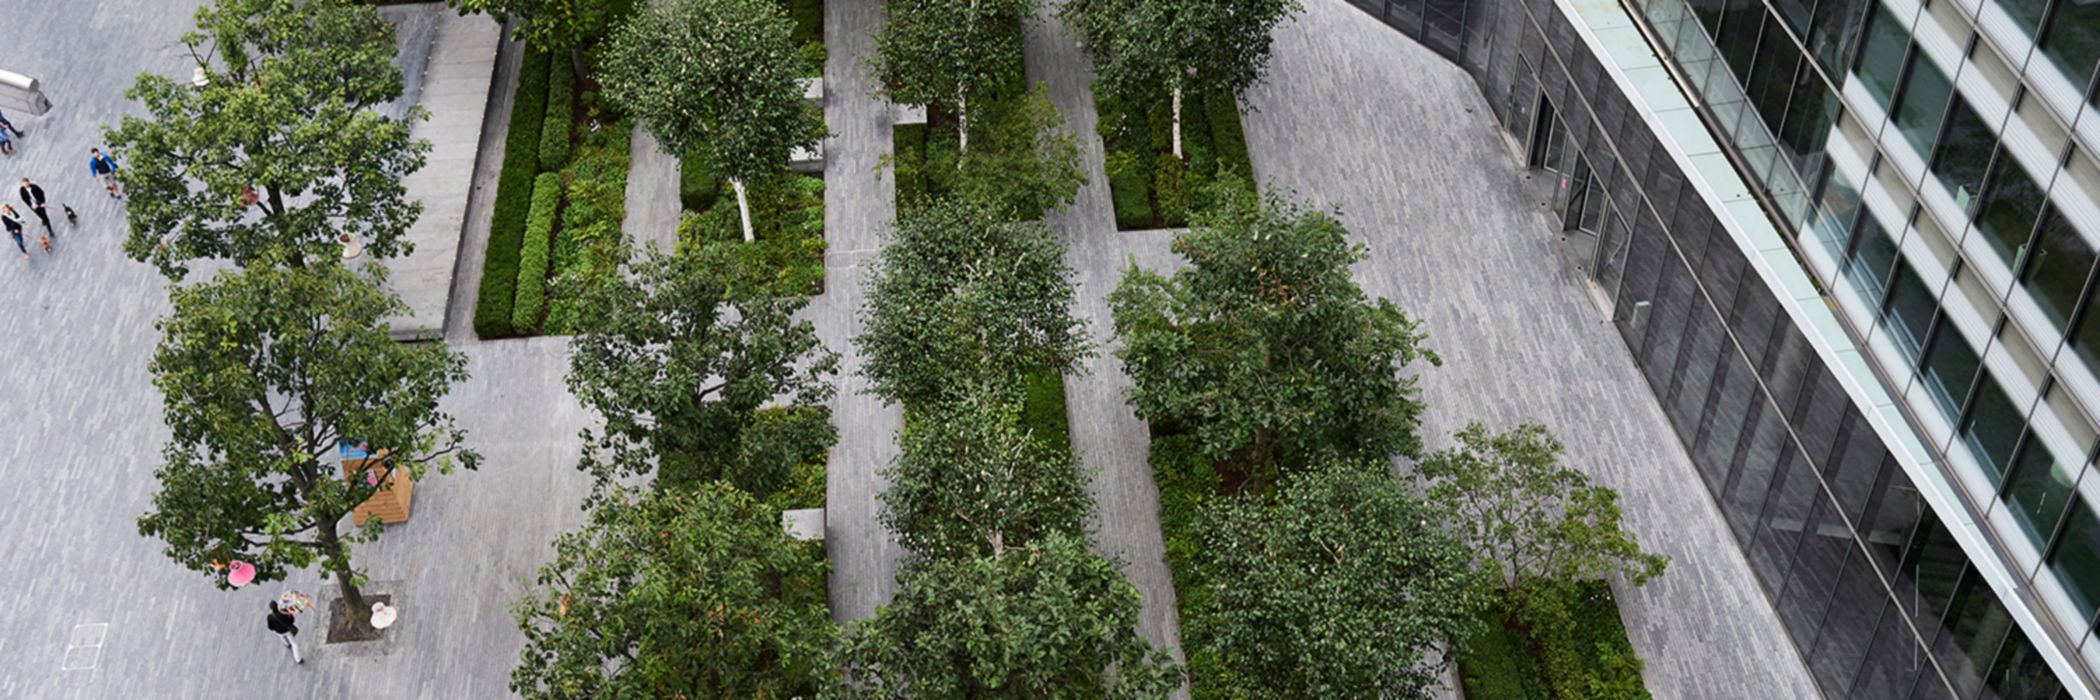 Lined trees in office courtyard